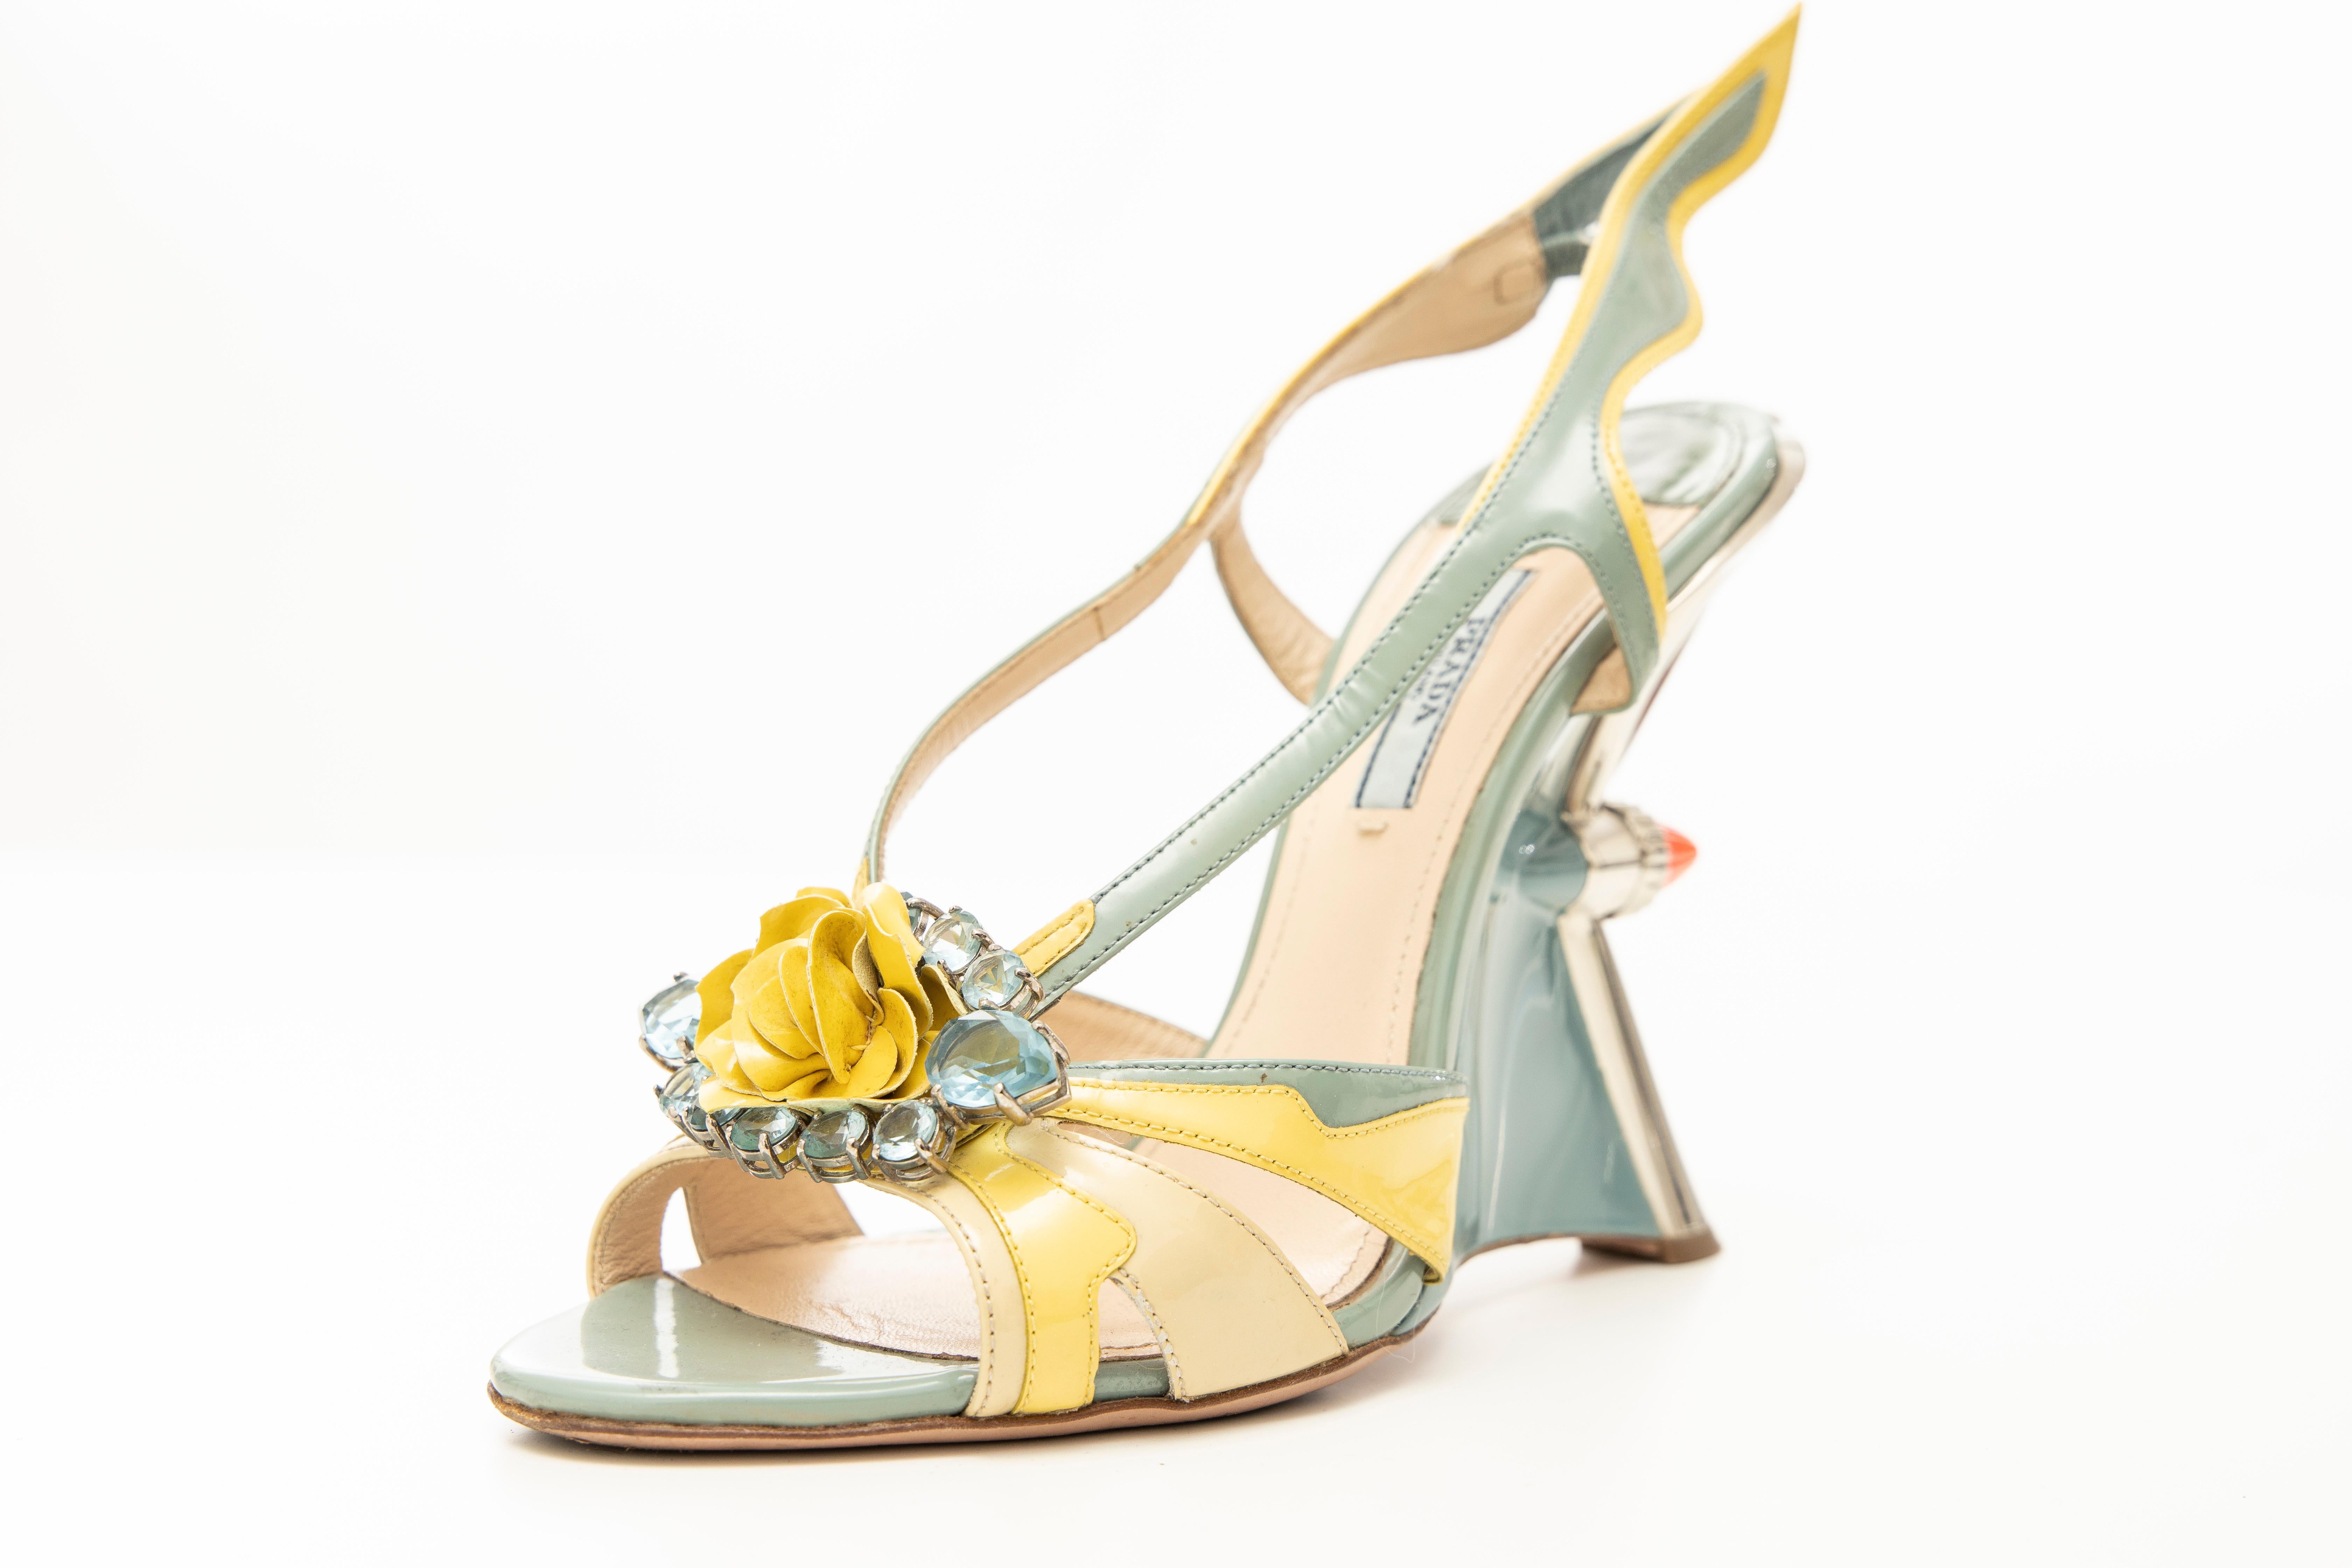 Prada, Spring-Summer 2012 jewel silver-tone taillight wedge sandal with flame accents at sides, floral appliqué at tops featuring crystal embellishments, resin heels with elasticized slingback straps. Includes dust bag.

IT. 40, US. 10

Heels: 5.25